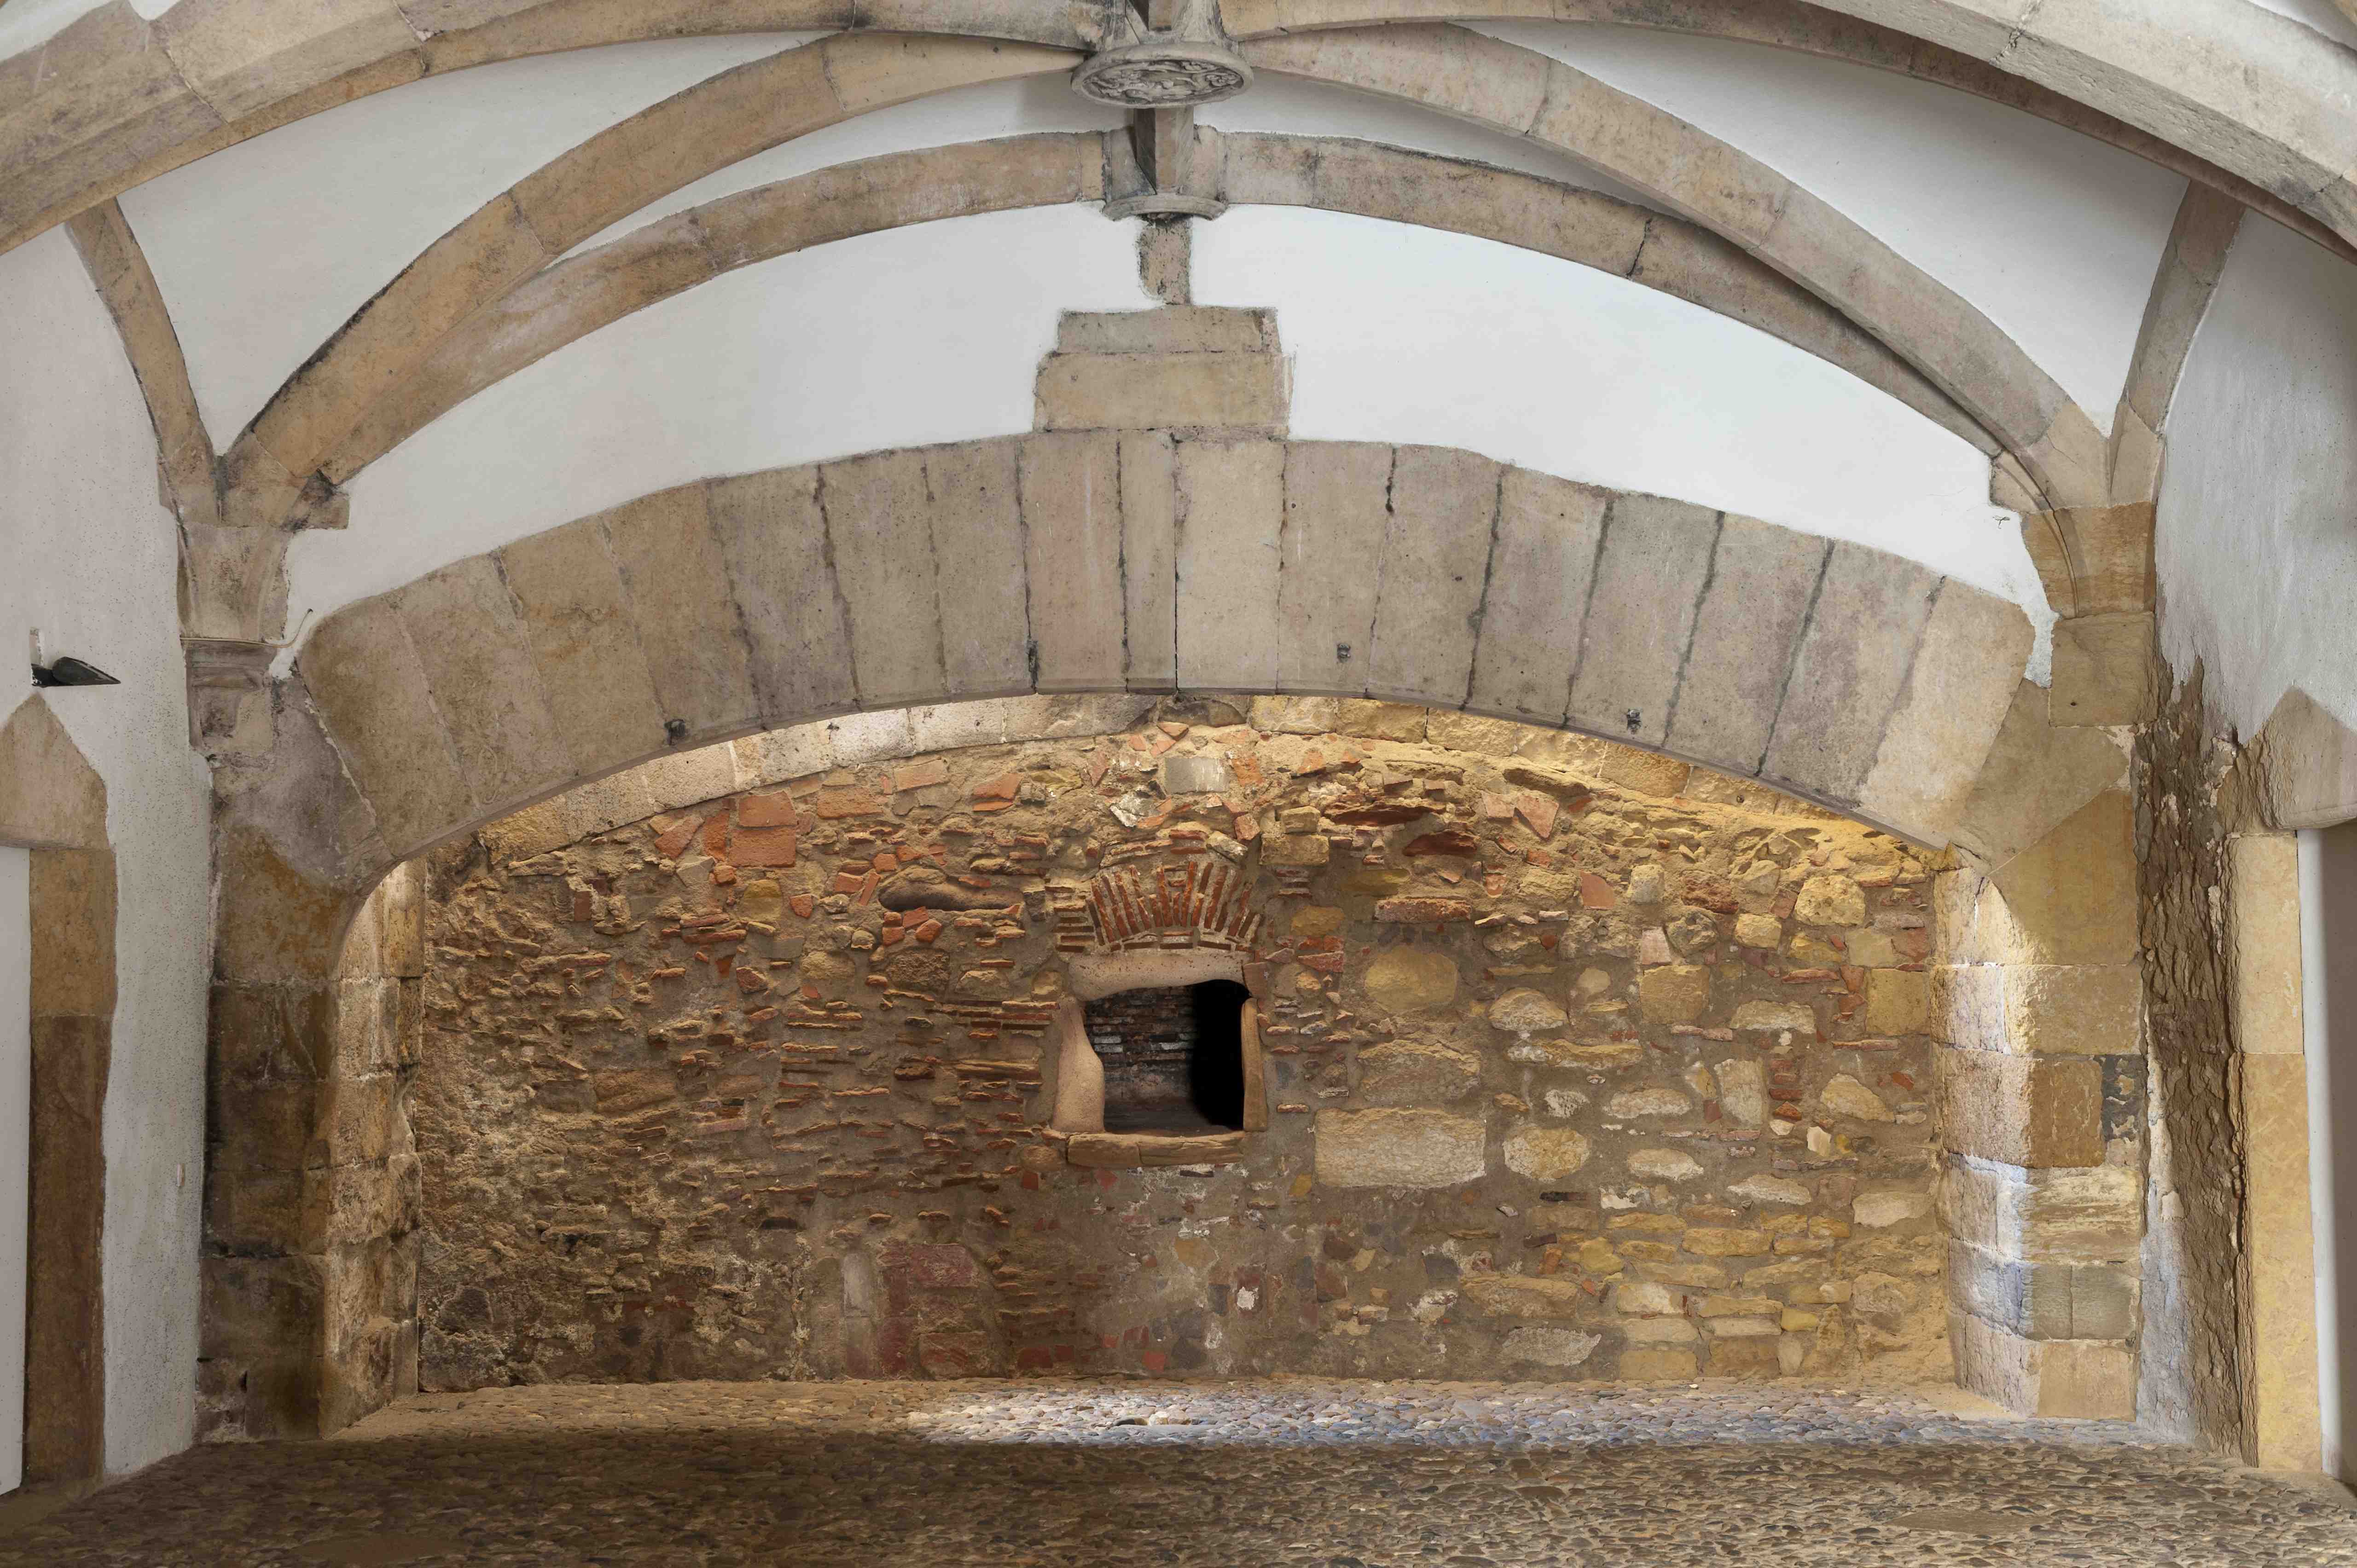 Oven room in Micha Cloister of the Convent of Christ